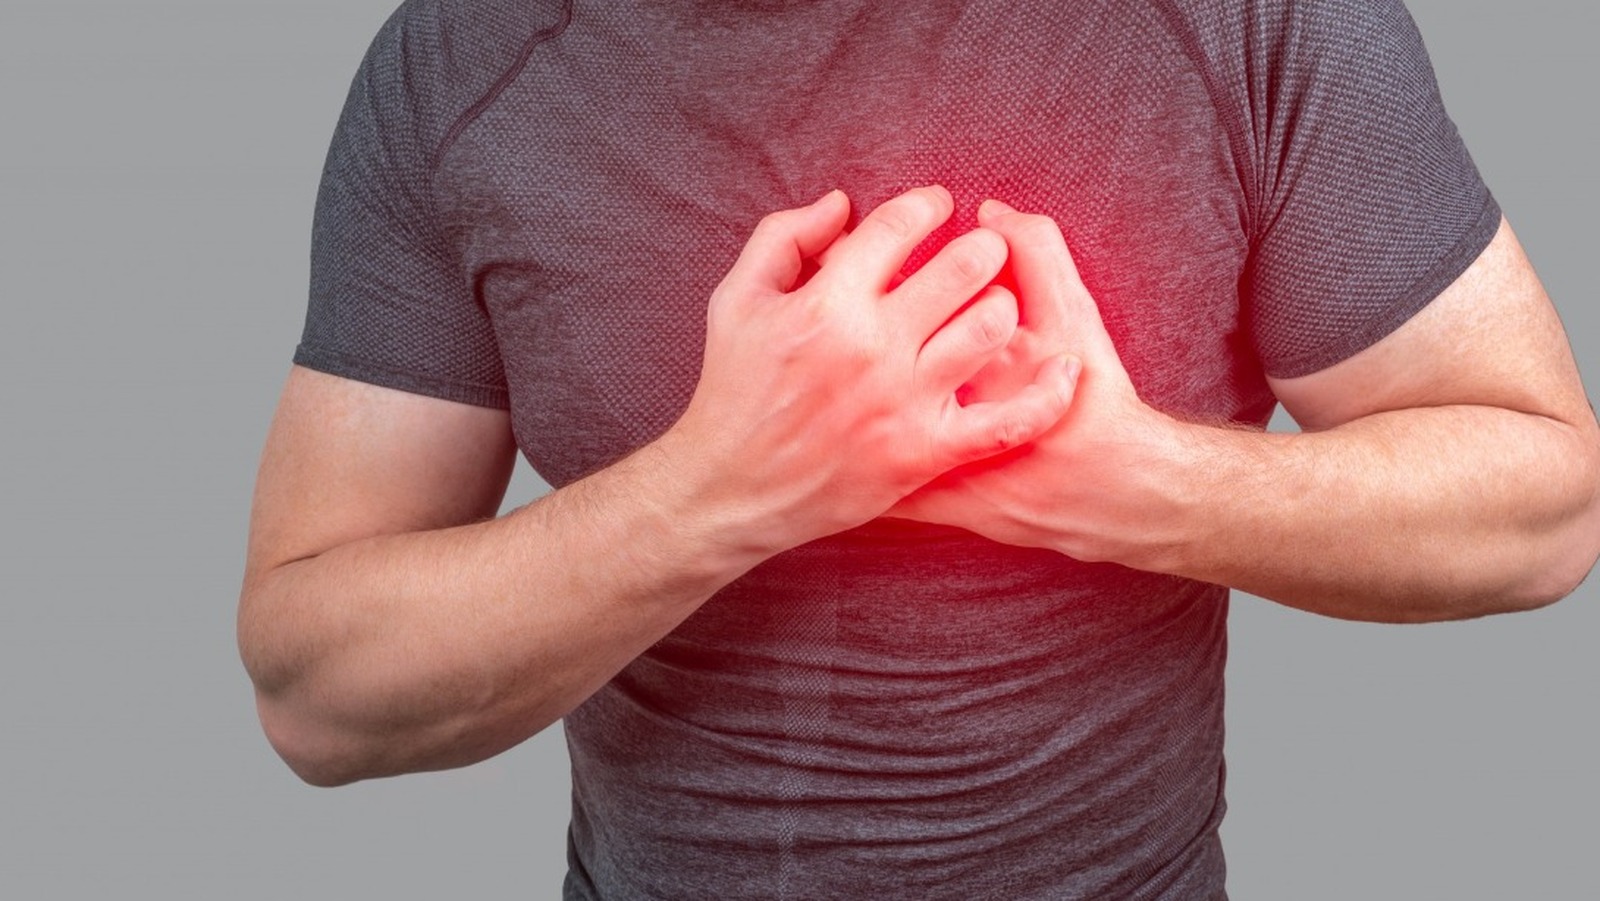 If You Have Sudden Sharp Pain In Your Chest That Disappears